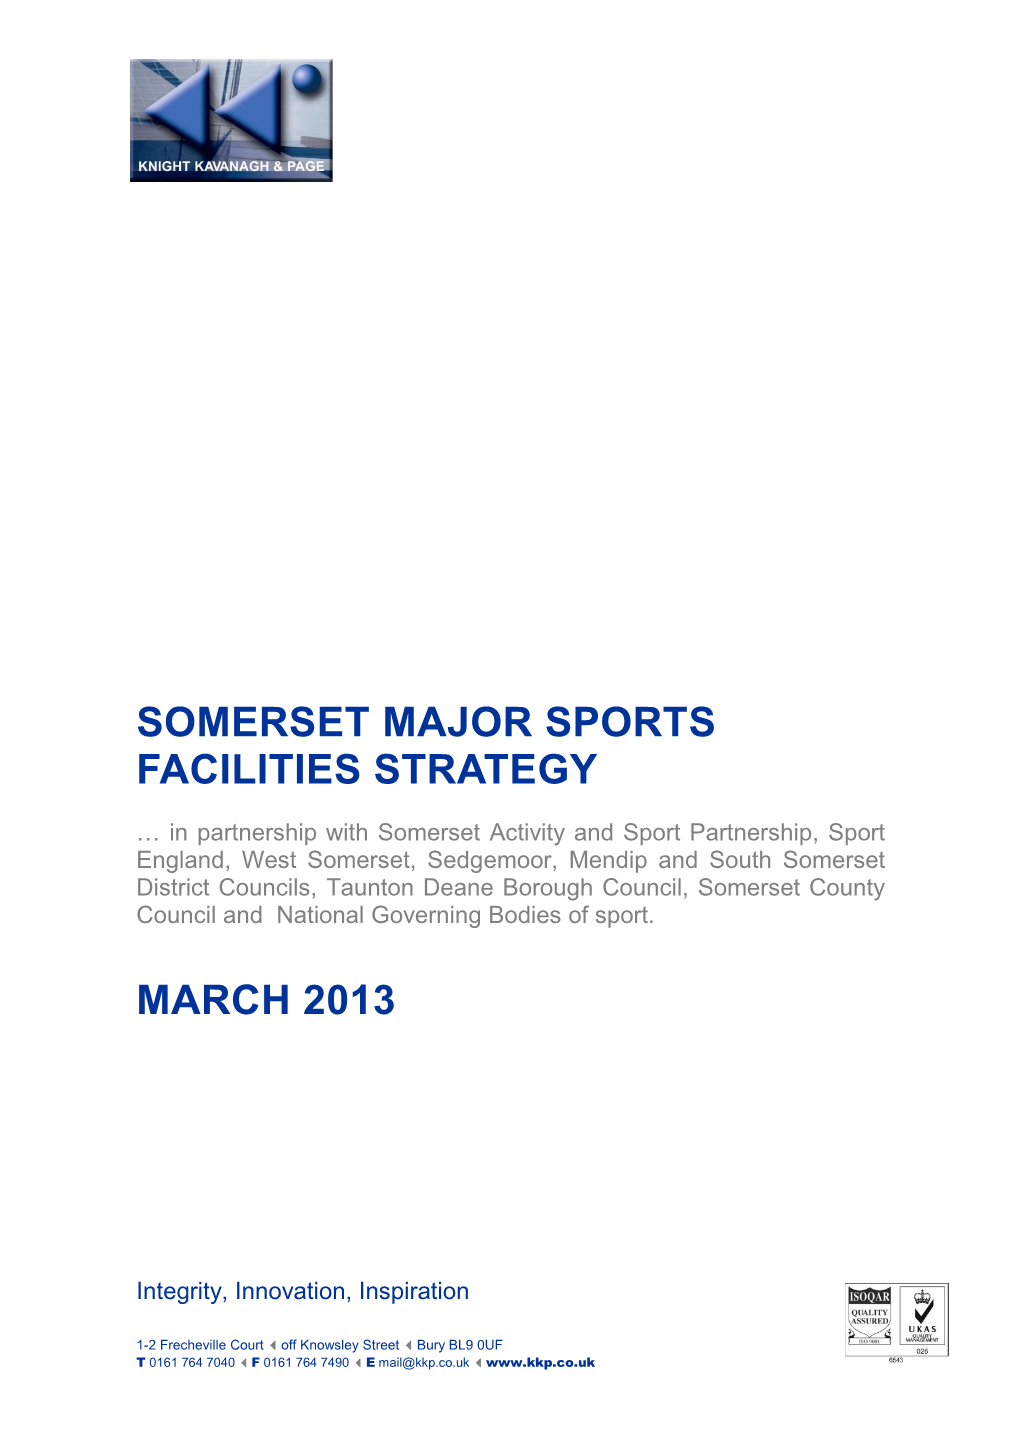 Somerset Facilities Strategy